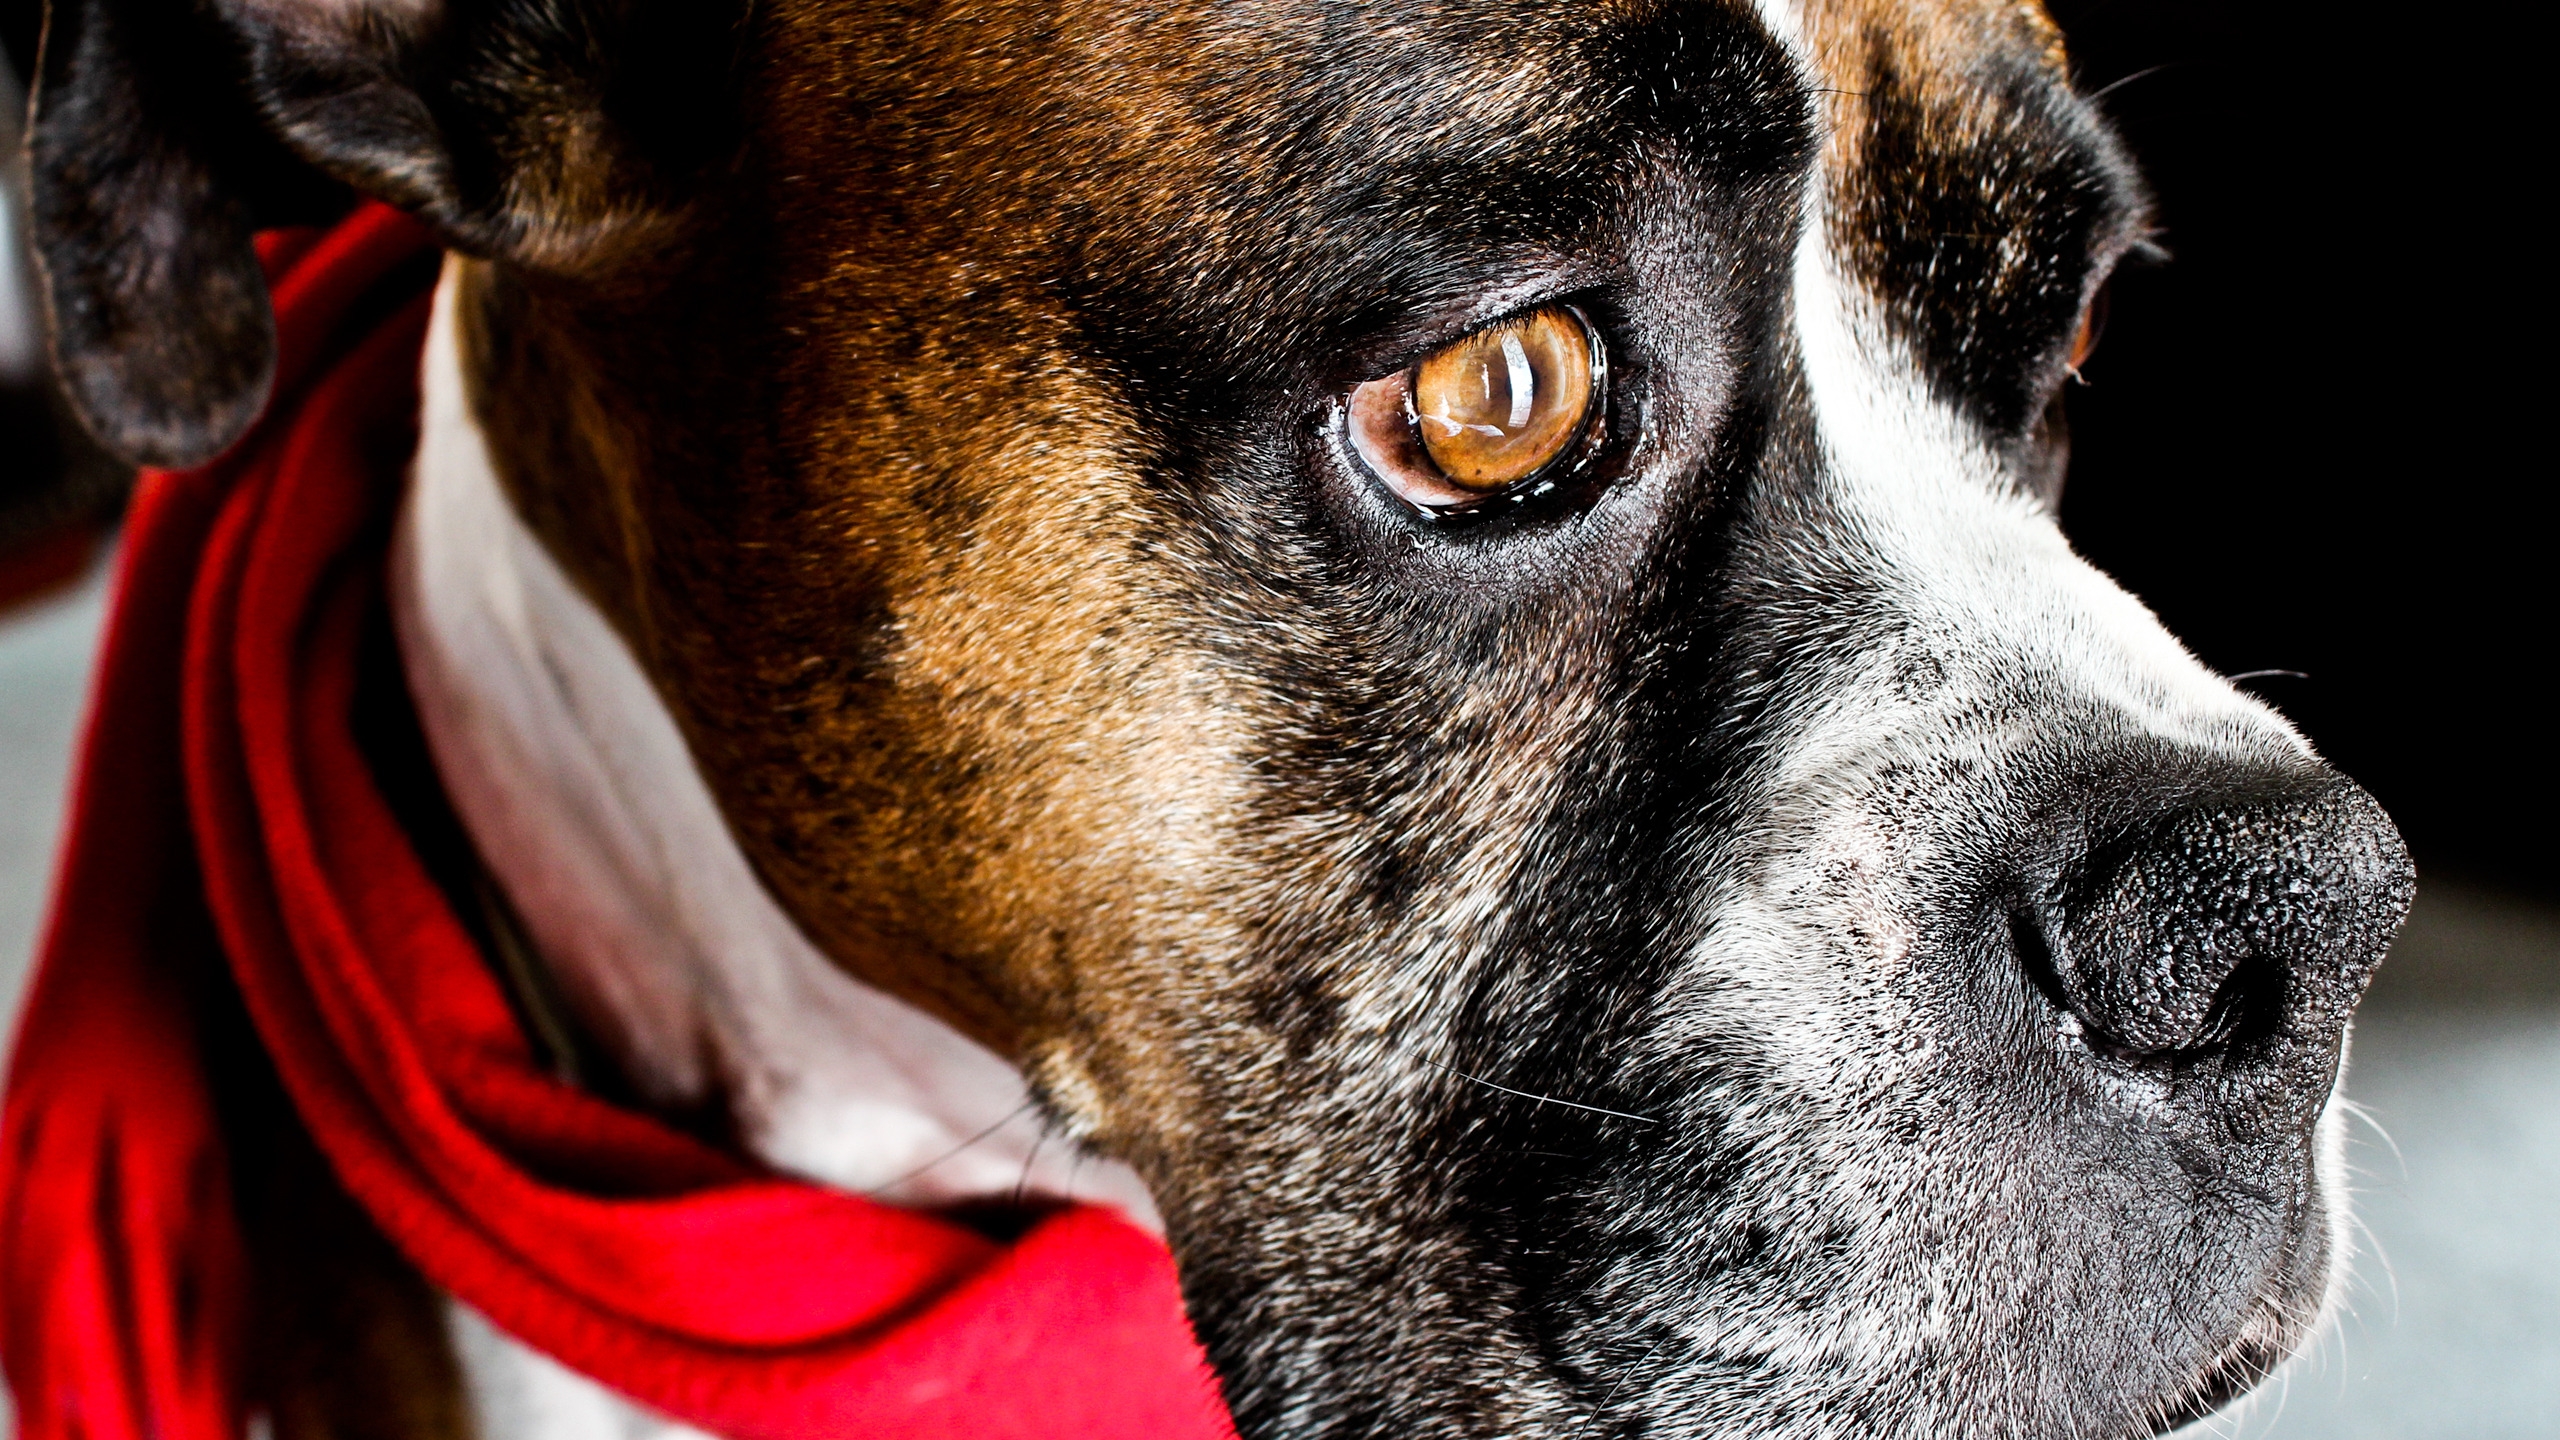 Dog with Red Scarf for 2560x1440 HDTV resolution